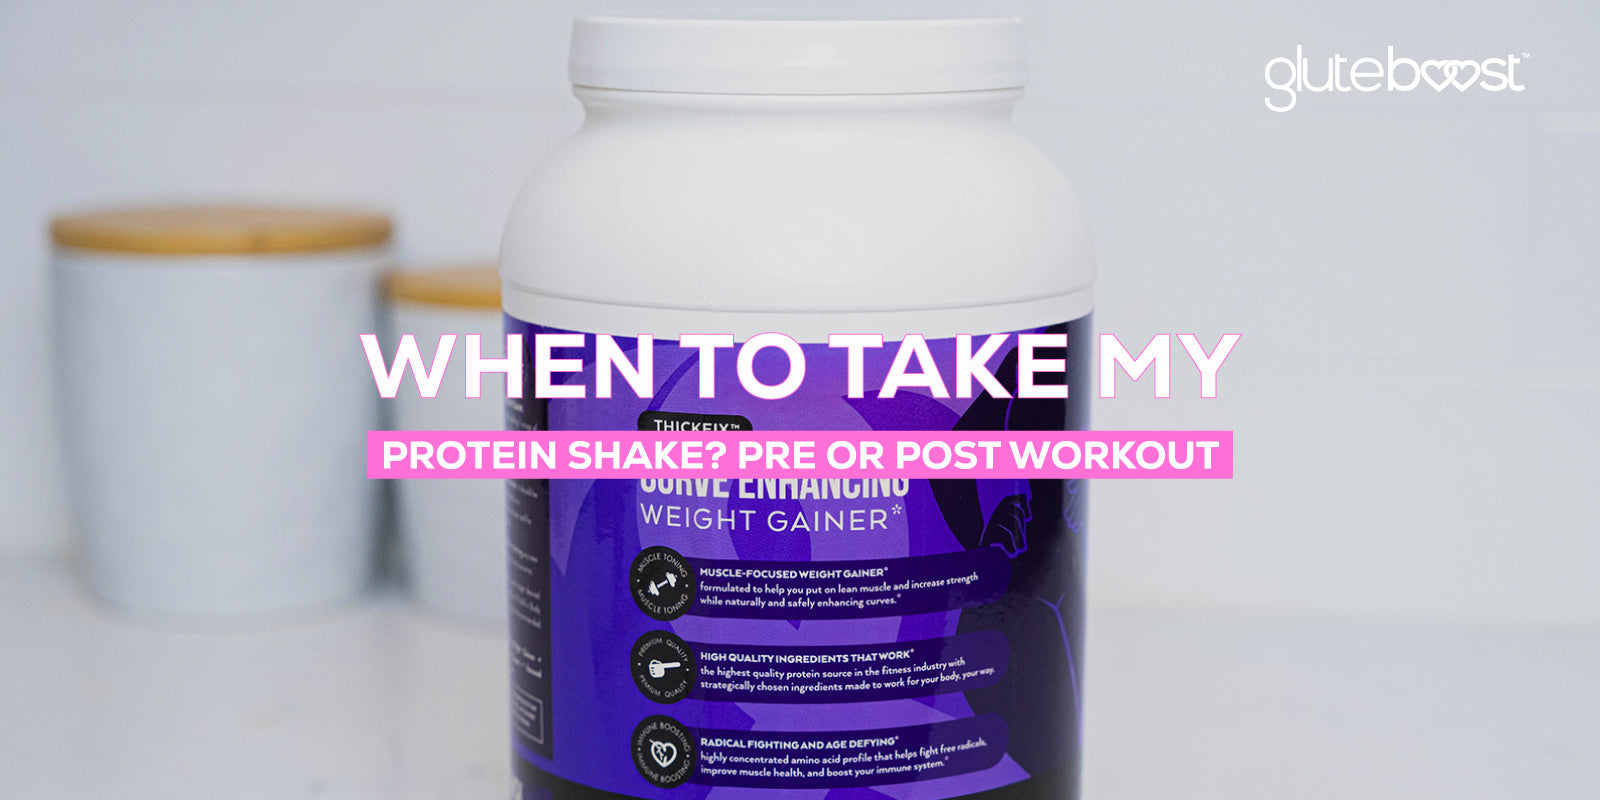 When to take my protein shake? Pre or post workout - New